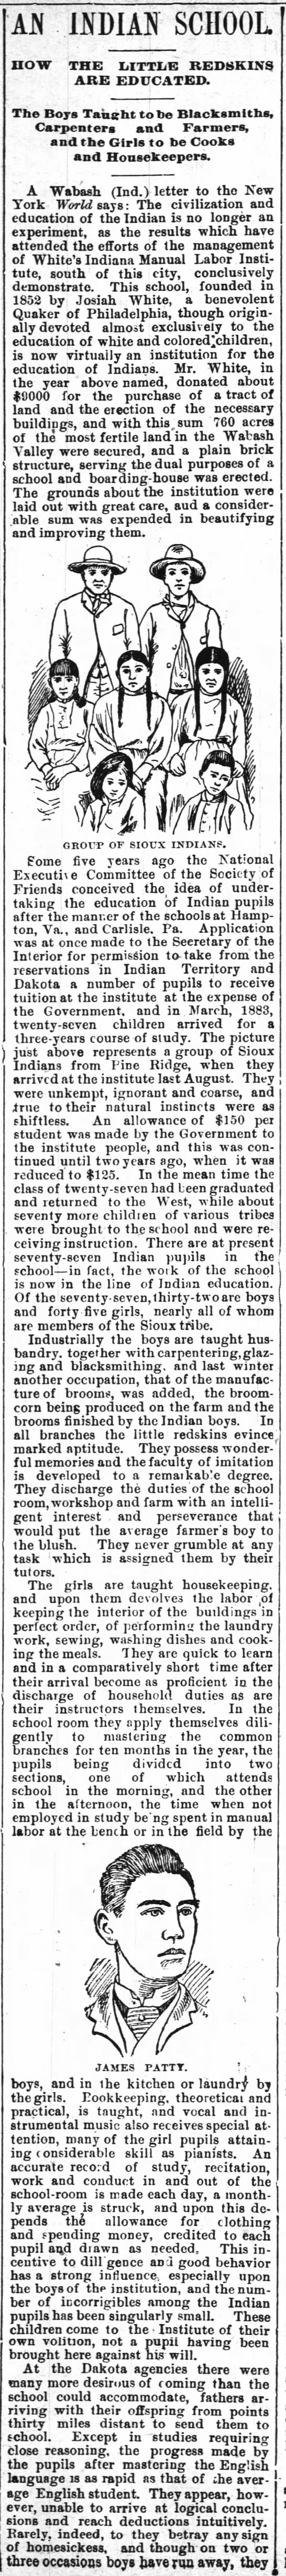 An Indian School - White's Indiana Manual Labor Institute - Coppock - 